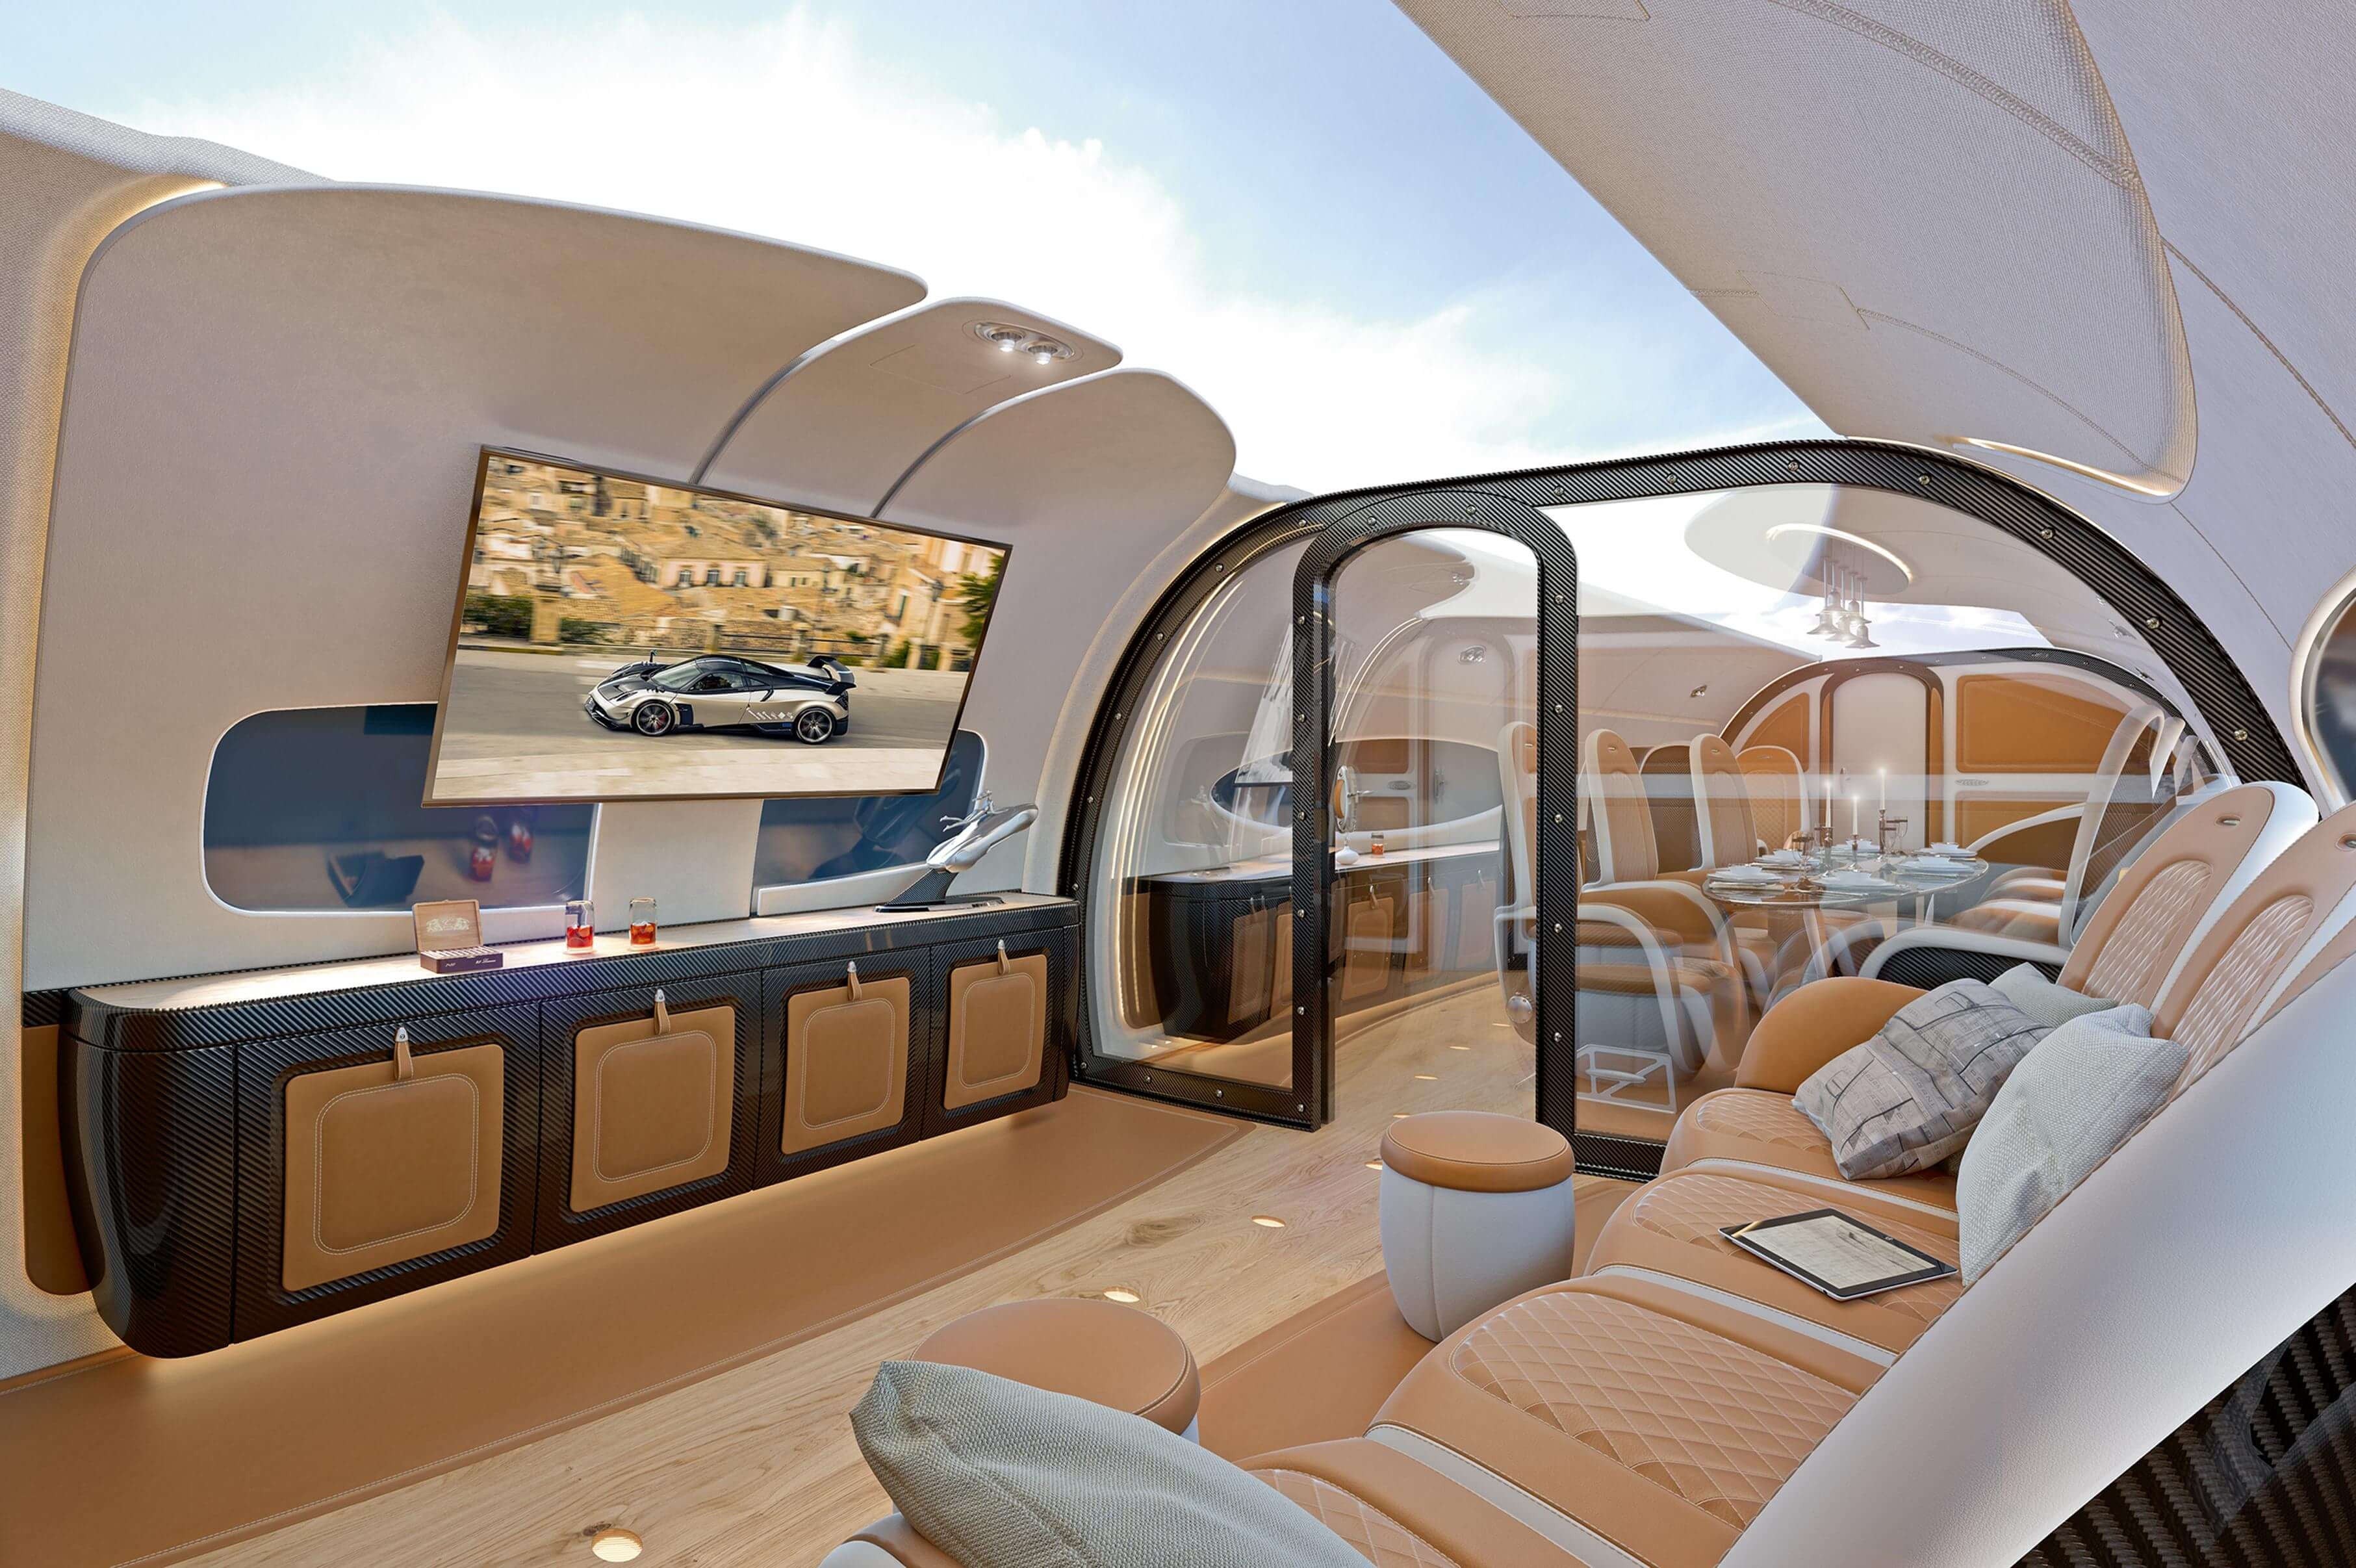 Reimagined Aircraft Cabin by Pagani and Airbus Has Digital Ceiling